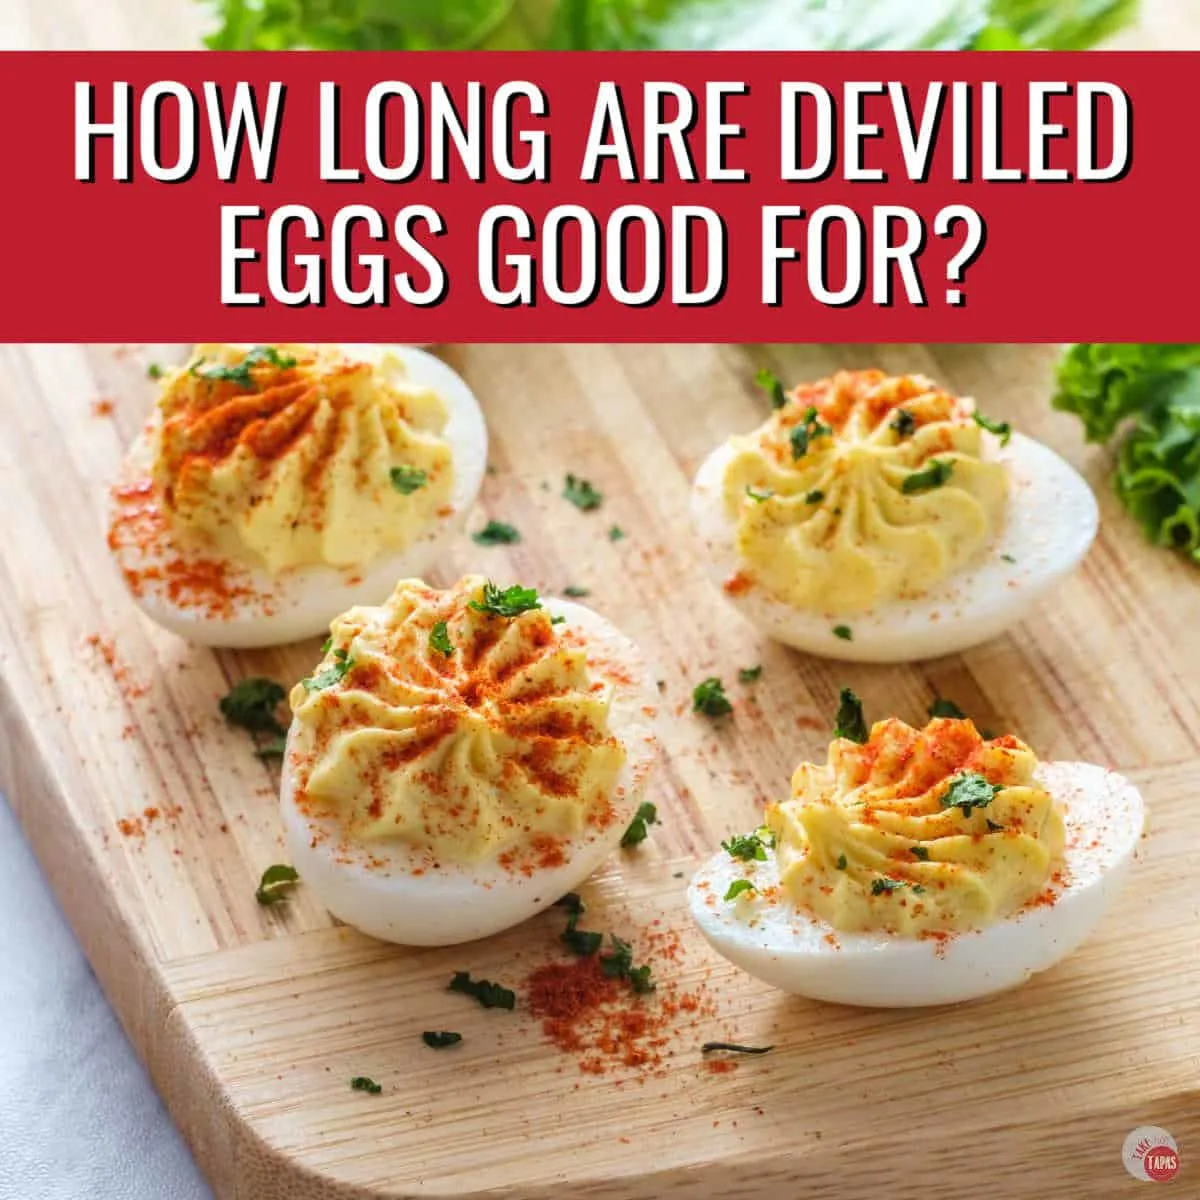 deviled eggs on a wood board with red banner and text